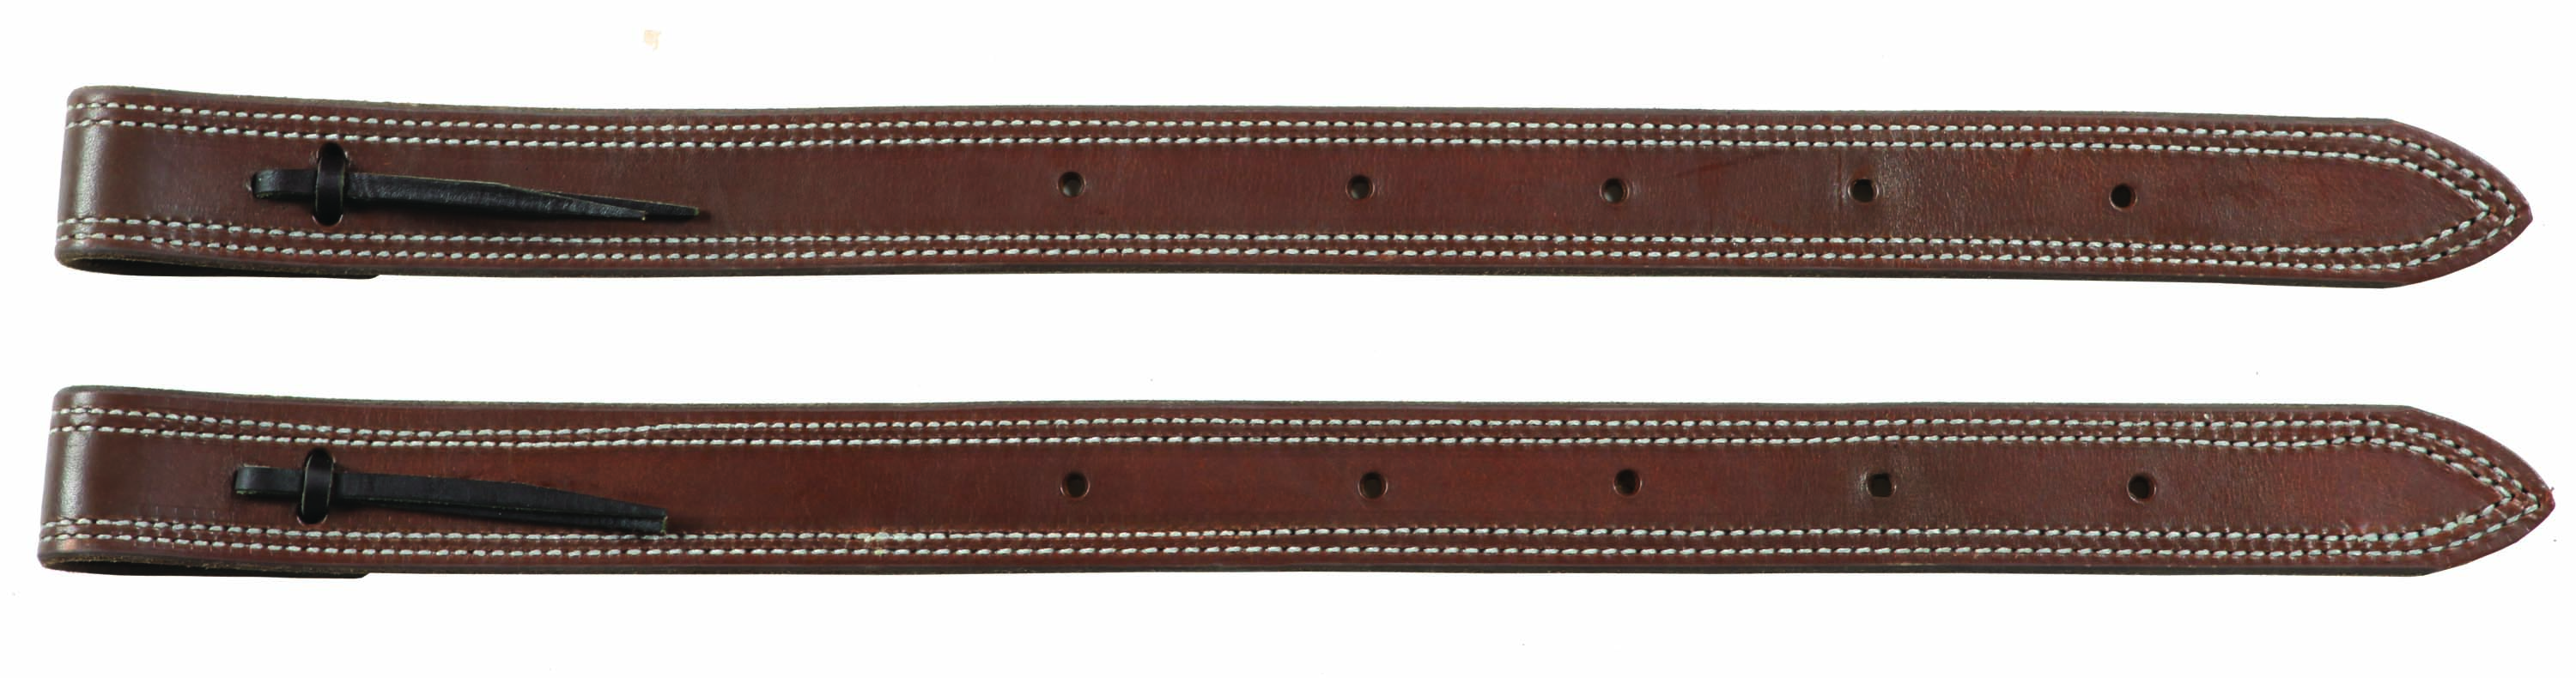 1 3/4" x 24" Pair of Oiled Back Cinch Billets by Berlin Custom Leather